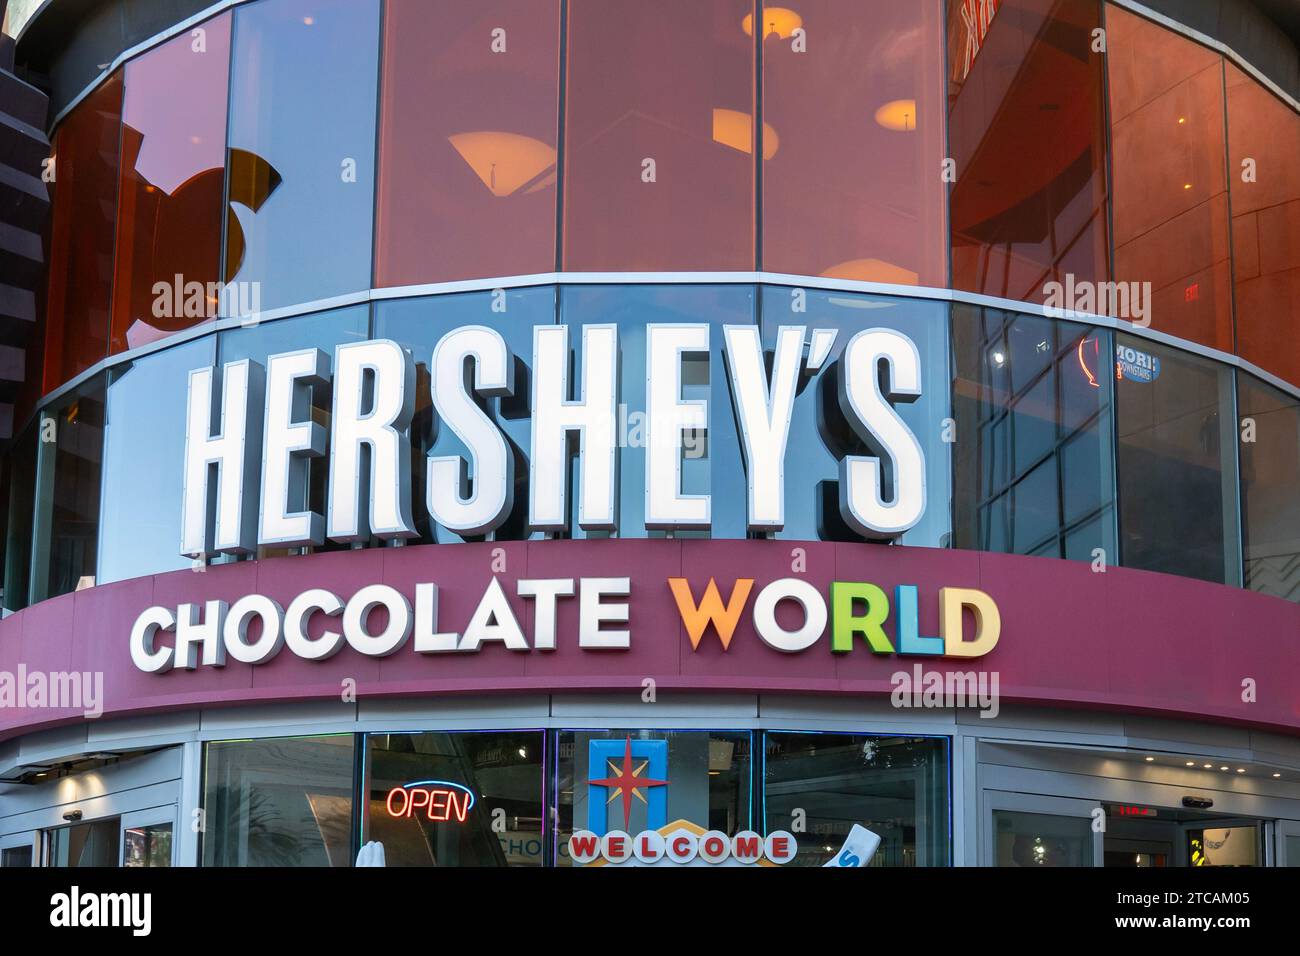 Hershey's Chocolate World sign on the building at the store in Las Vegas, Nevada, United States Stock Photo